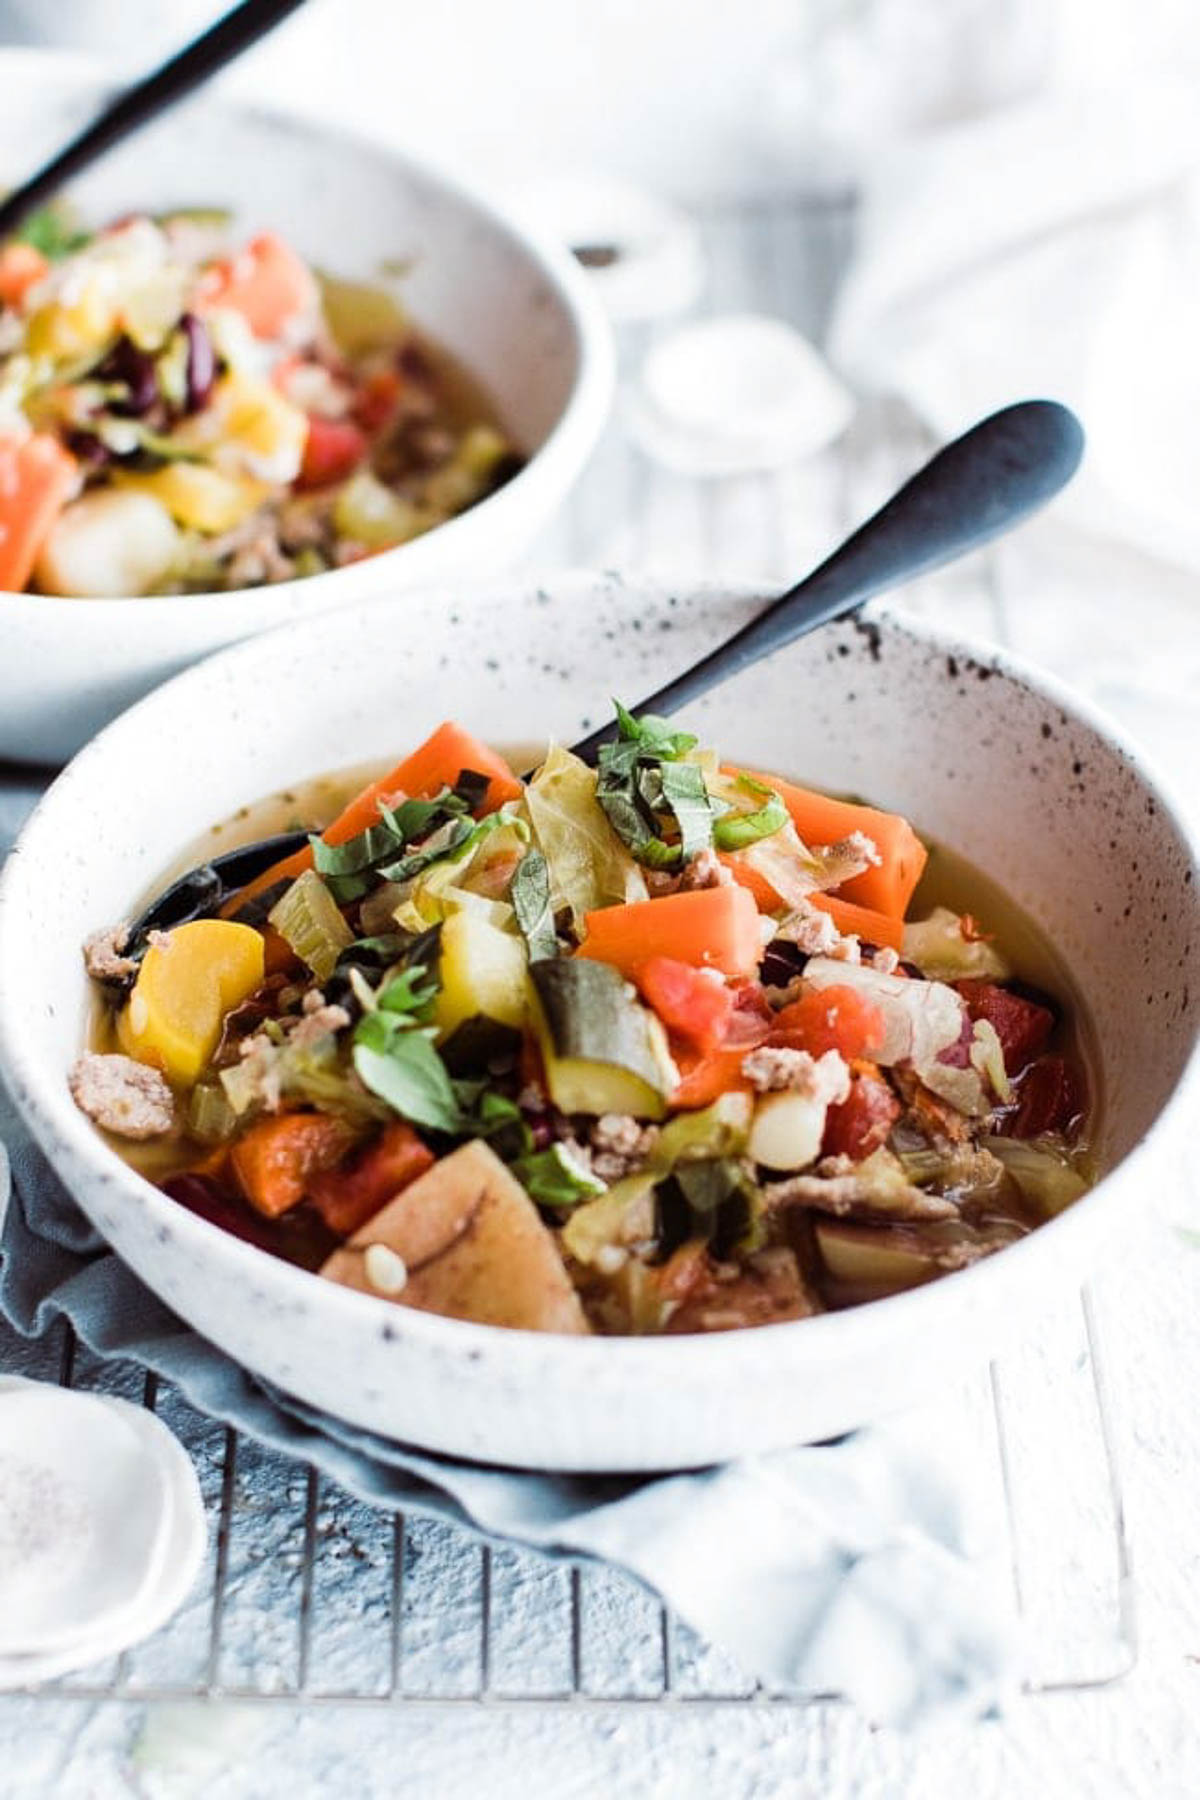 Vegetable weight loss soup in a bow with a spoon ready to eat.